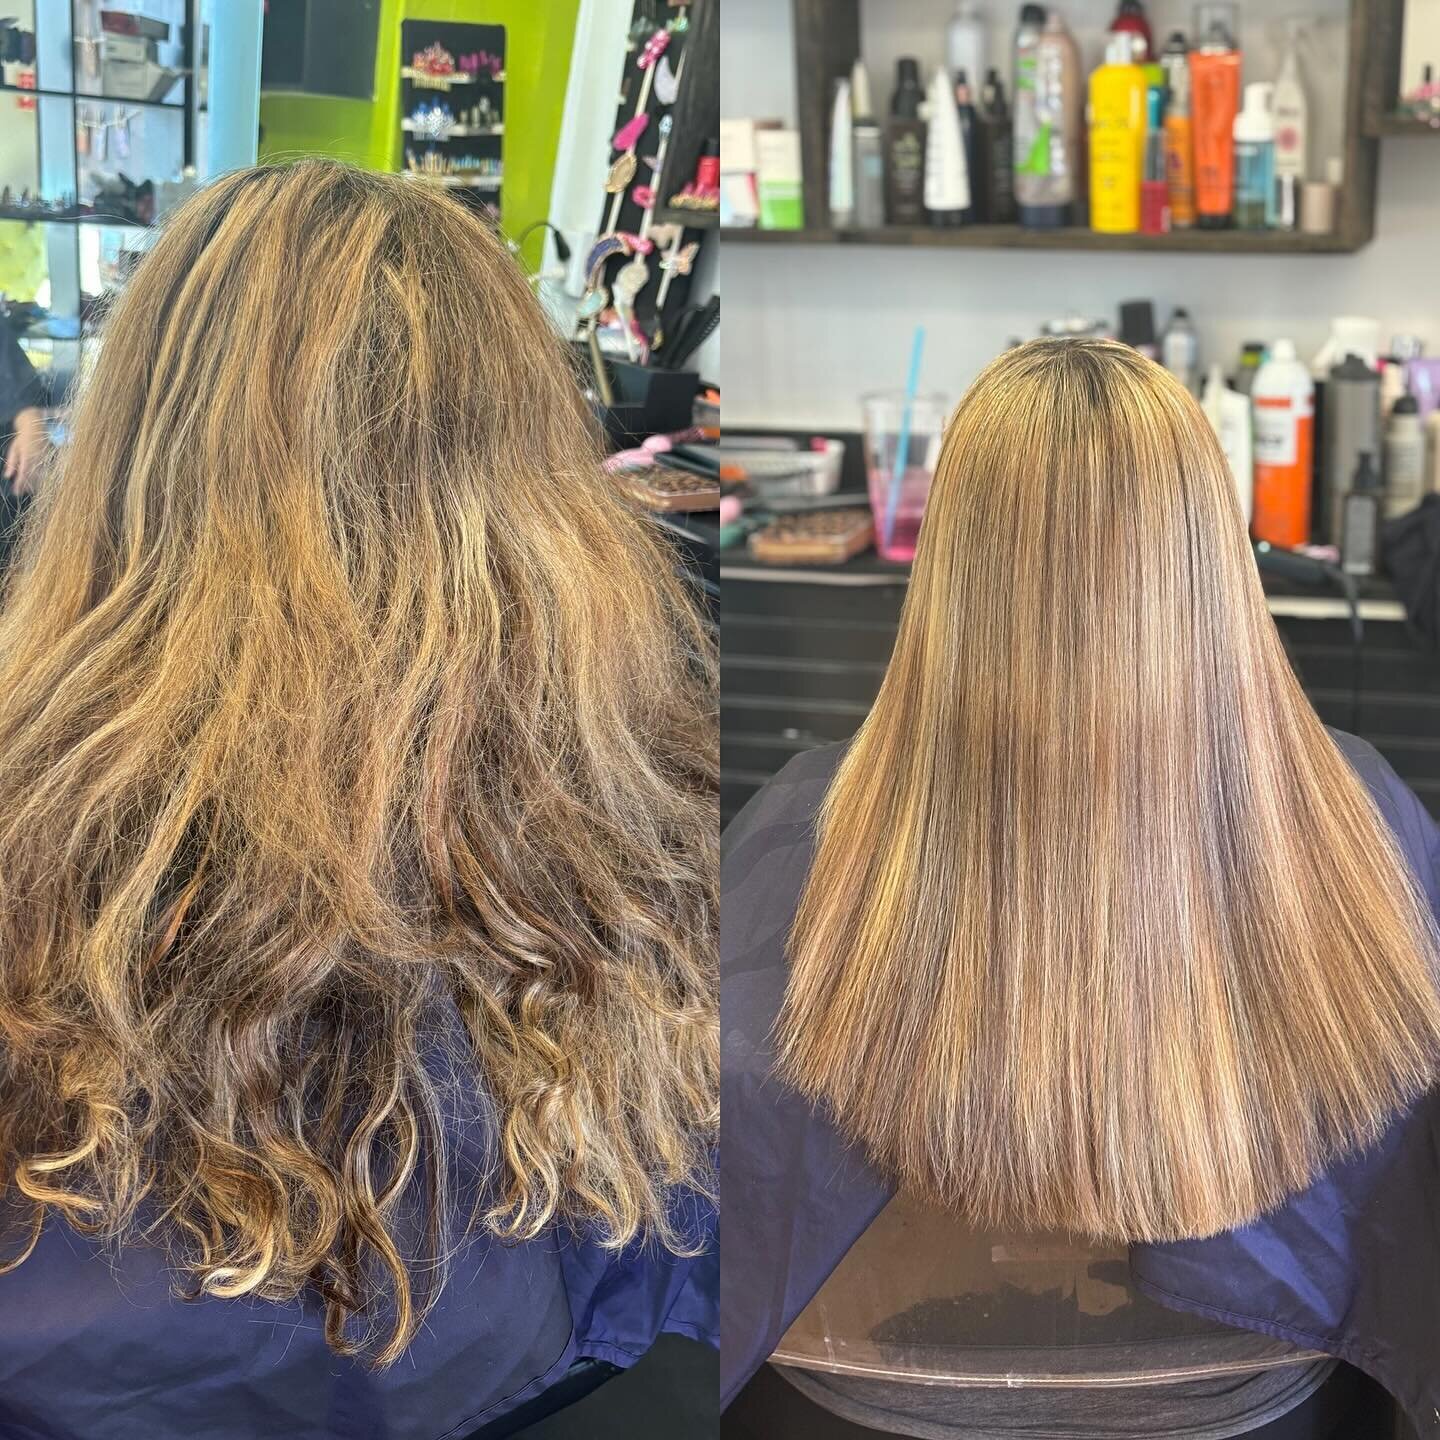 ❣️❣️❣️ The Brazilian blowout for the win ❣️❣️❣️ how gorgeous and sleek is this head of hair? 

Want frizz free hair? Smooth hair? Cut your blow dry time in half? Try the @brazilianblowout  it&rsquo;s awesome! 

All of March save $50 on Brazilians! @h